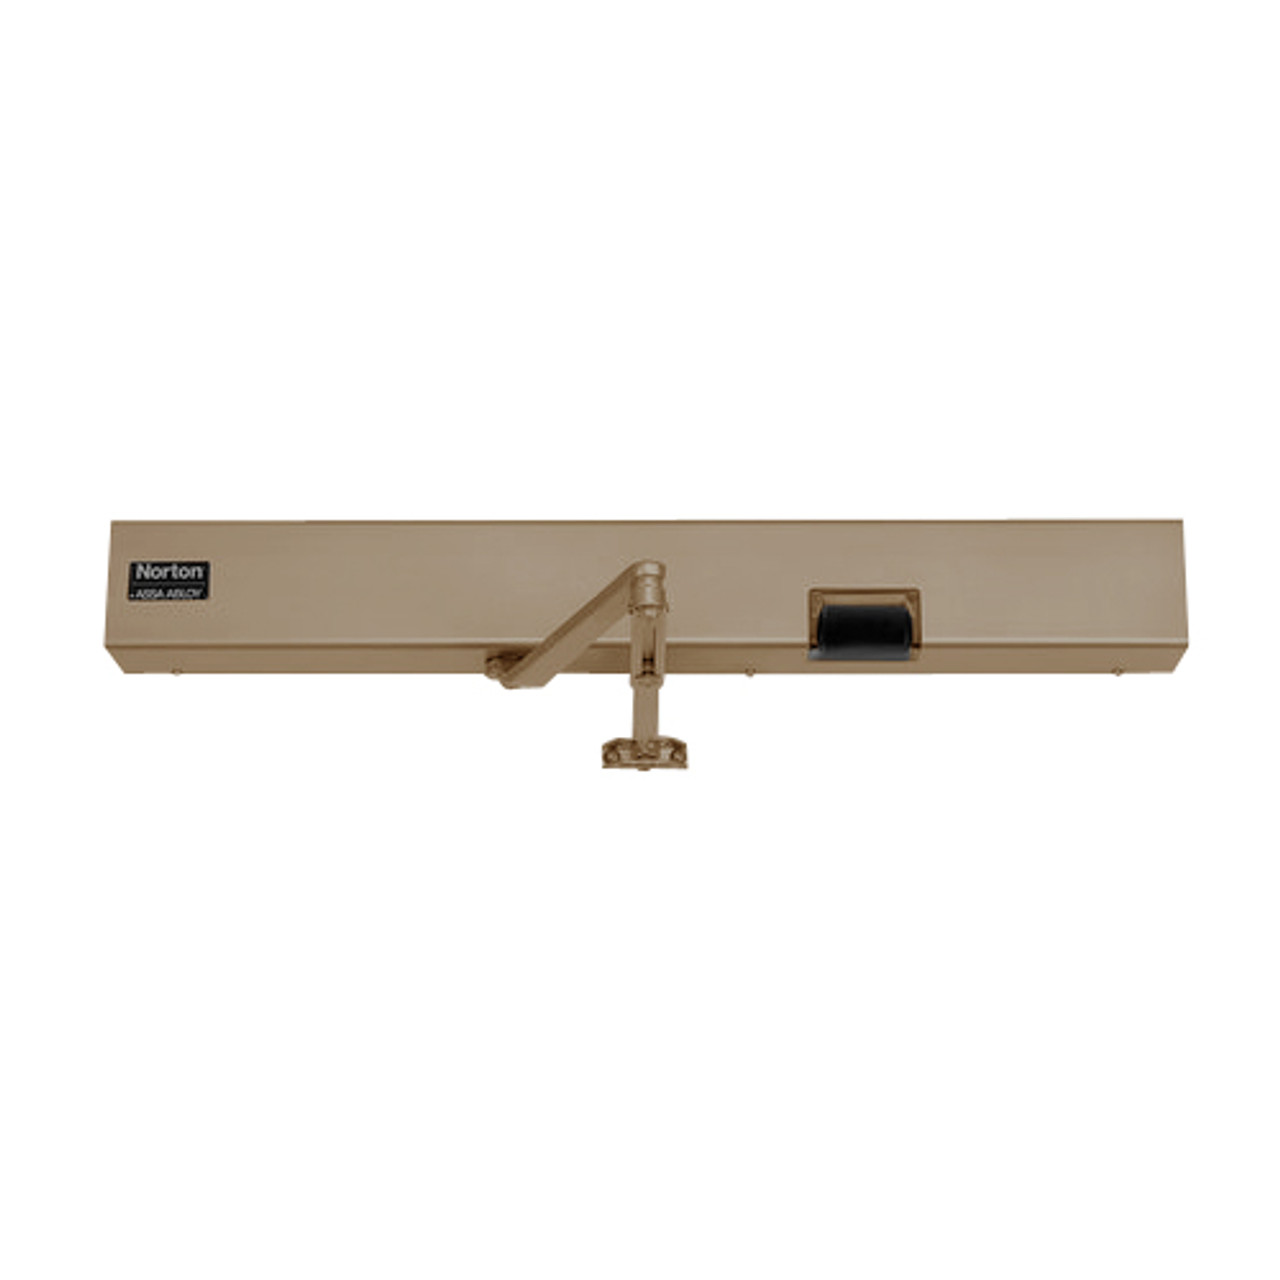 7124SZ-RH-120VAC-691 Norton 7100SZ Series Safe Zone Multi-Point Closer/Holder with Motion Sensor and Push Side Double Lever 11 inch Main Arm in Dull Bronze Finish